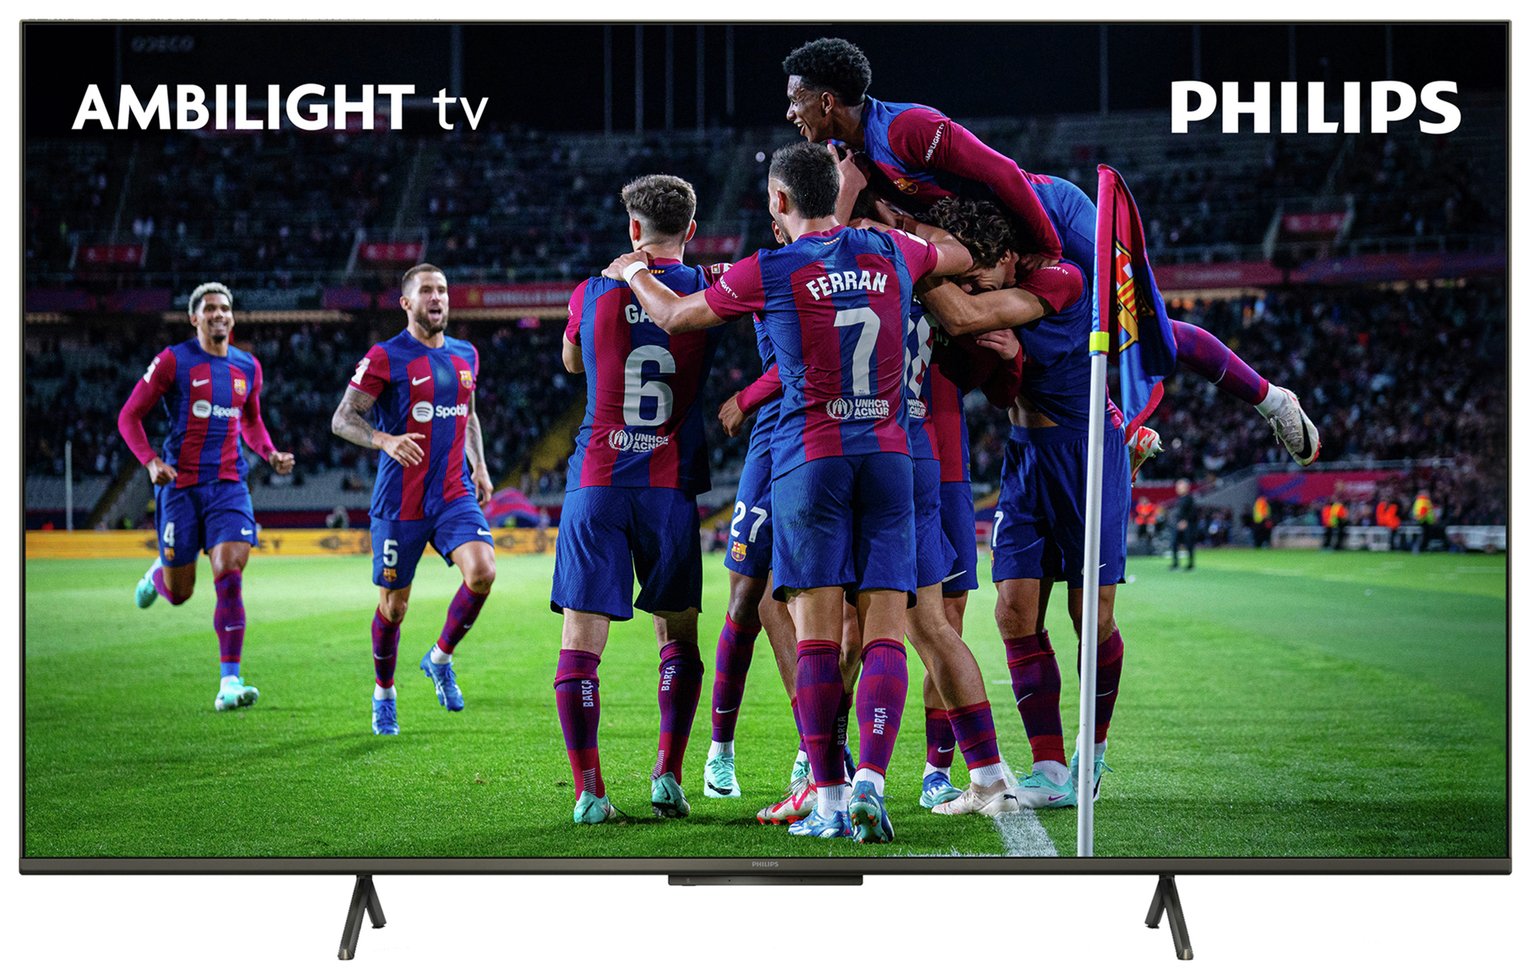 Philips Ambilight 55In PUS8108 Smart 4K HDR LED Freeview TV